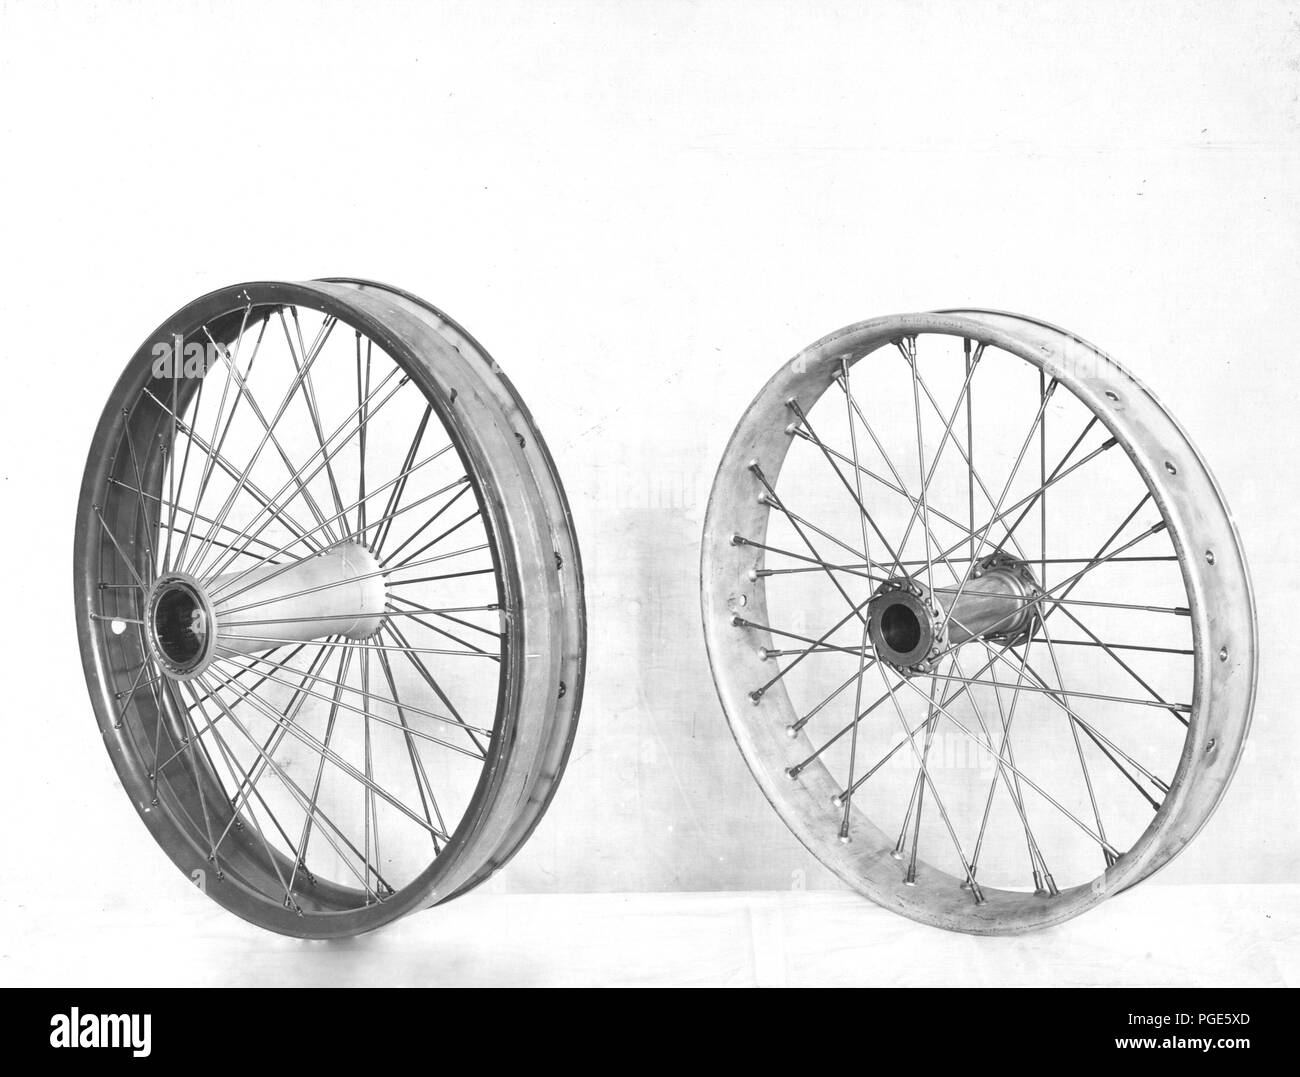 Bodies and parts for motor trucks manufactured by Edward G. Budd Manufacturing Co., Phila., PA. Aeroplane wheels Stock Photo